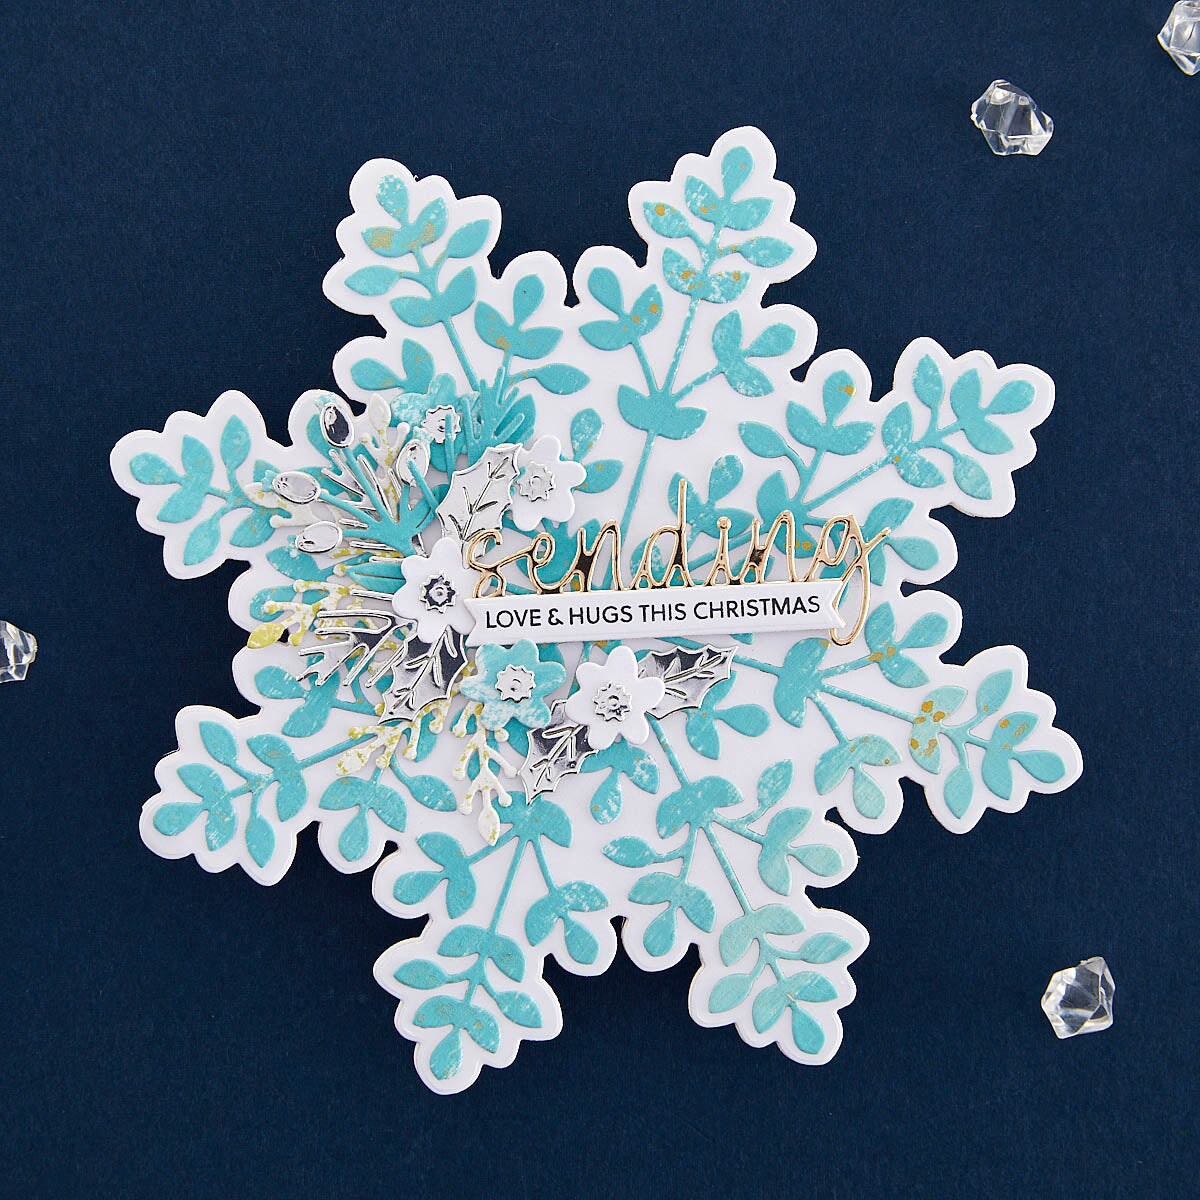 Spellbinders Snowflake Card Creator Etched Dies from the Bibi&#x27;s Snowflakes Collection by Bibi Cameron